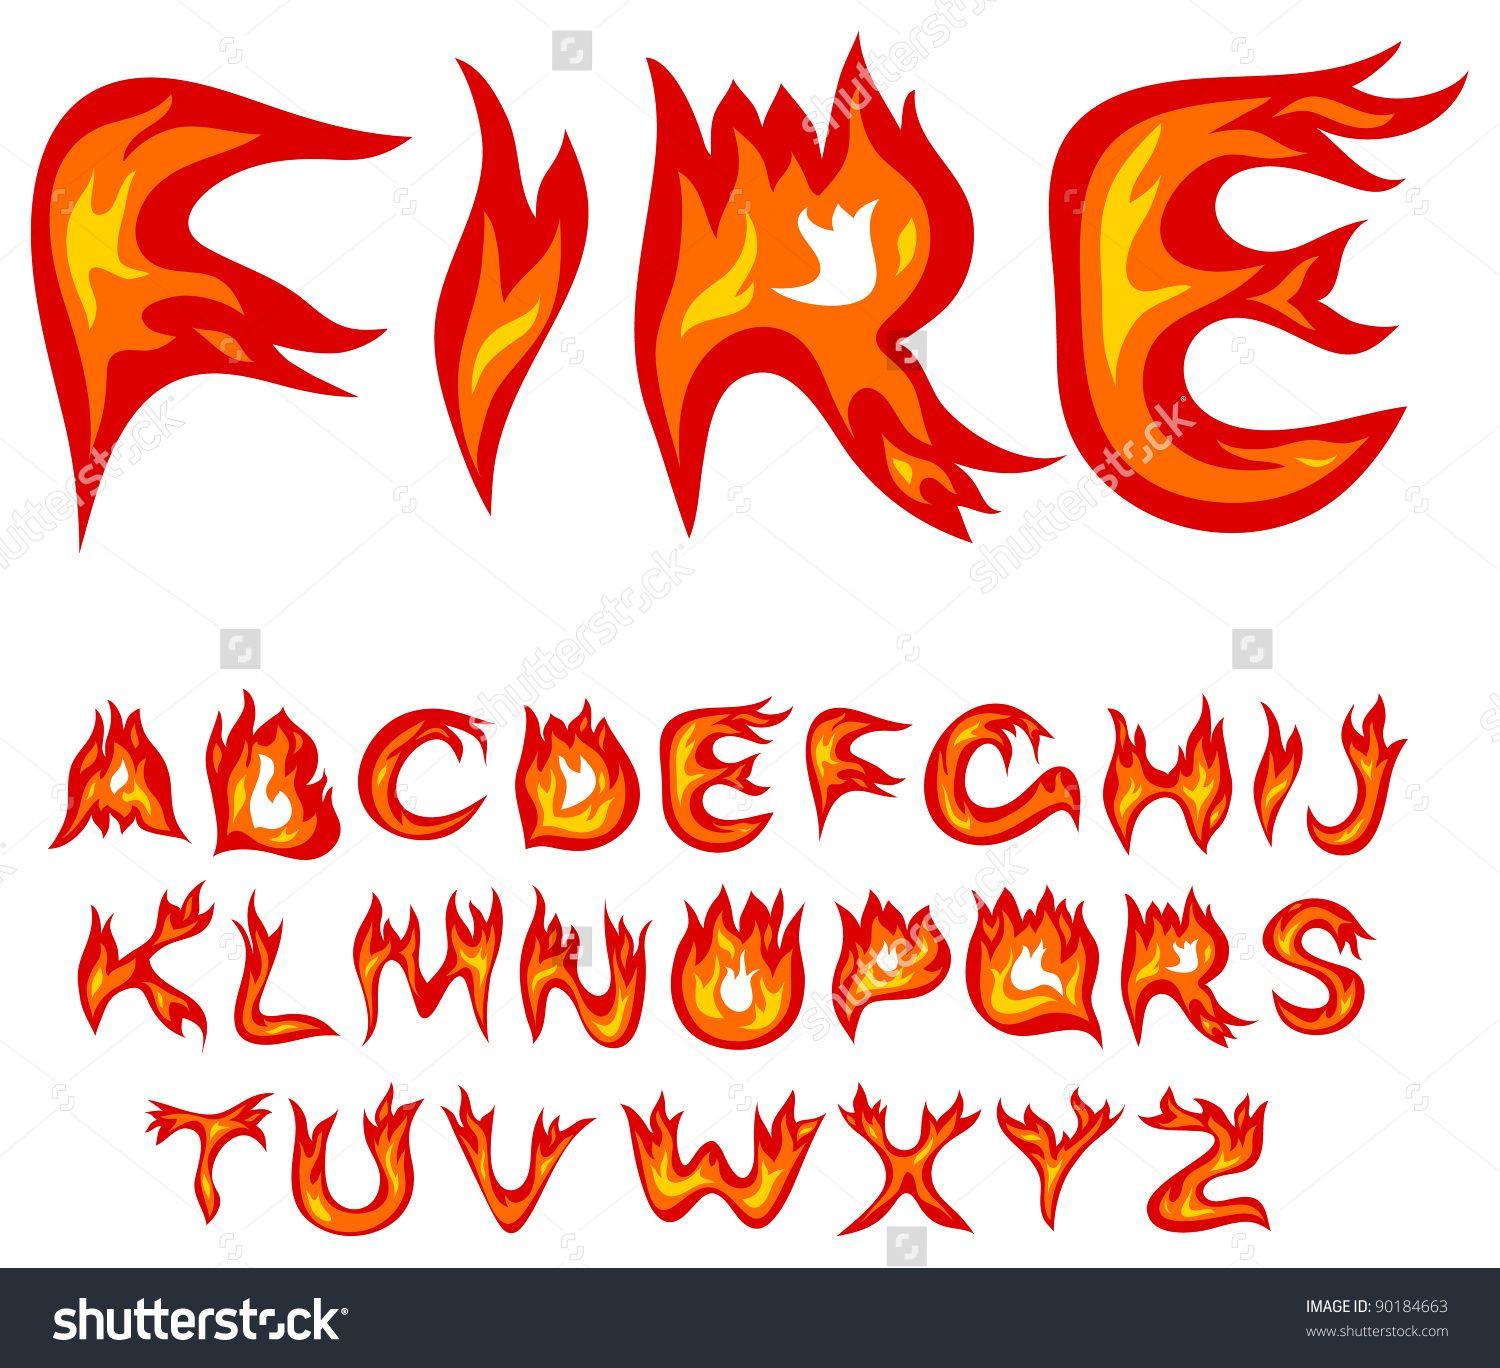 Flaming Letter S Logo - letters as flames vector - Google Search | Logo Design | Lettering ...